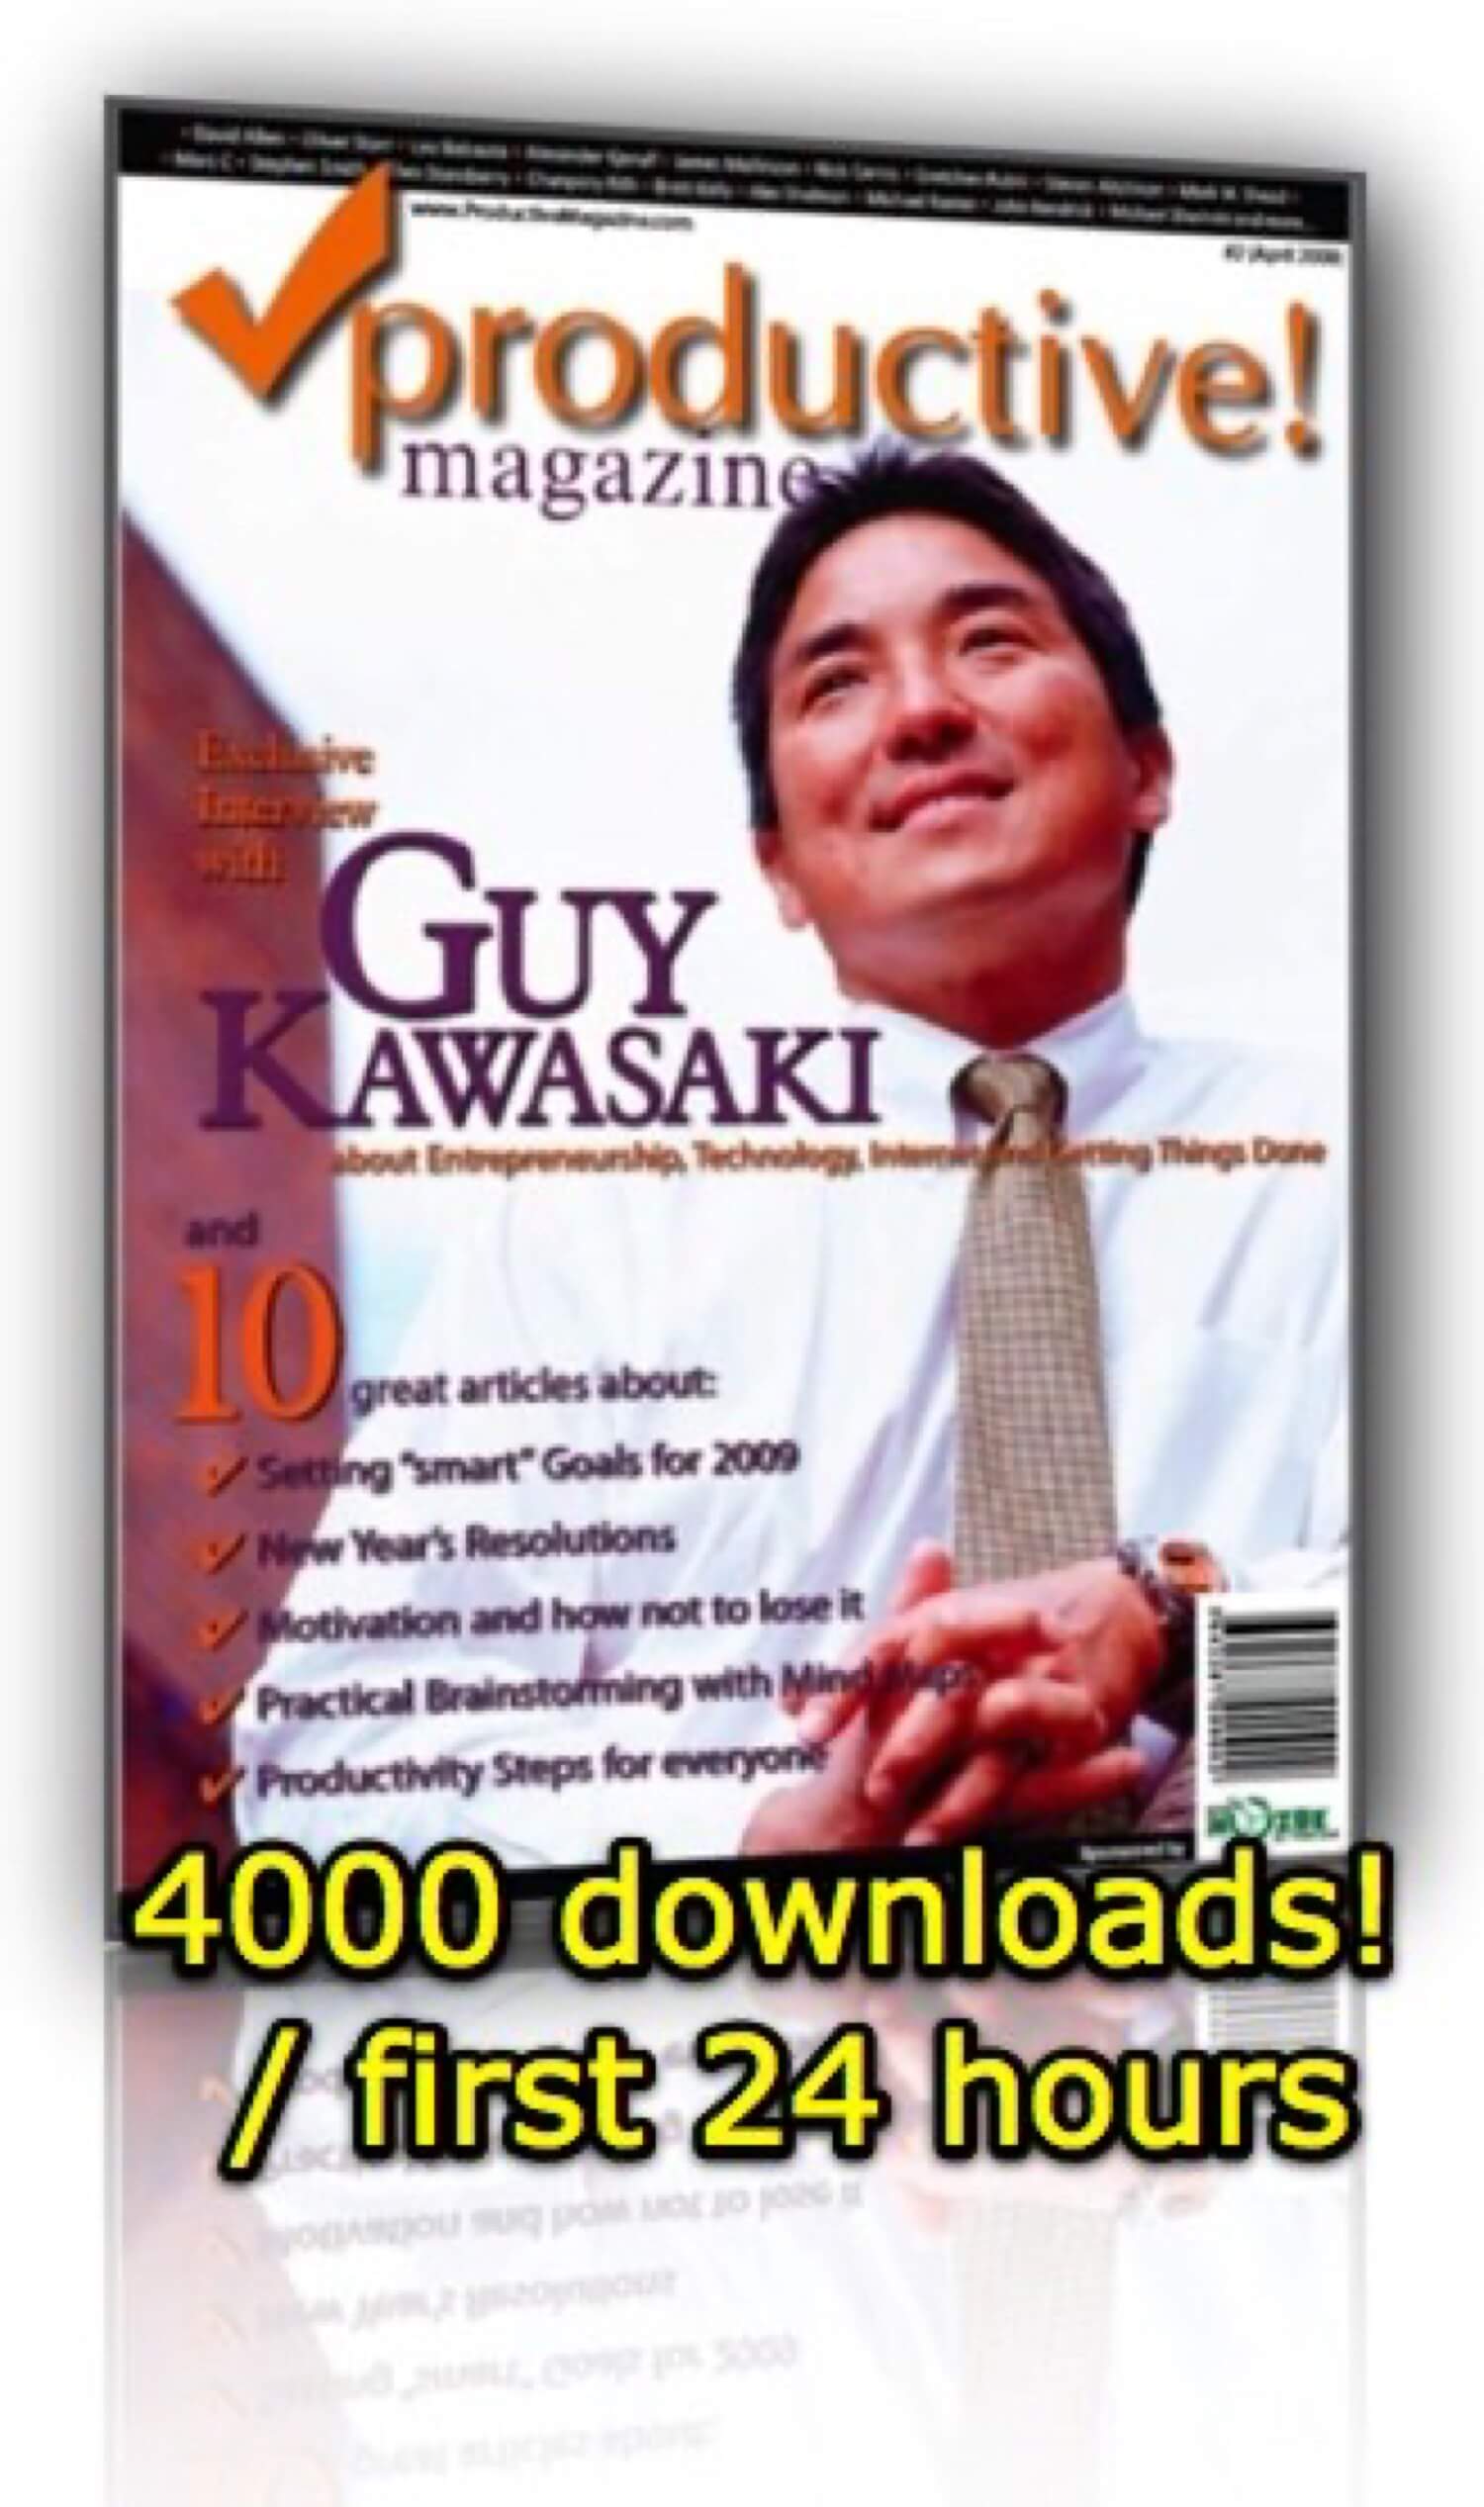 4000+ downloads in the first 24 hours - issue #2 hits it!